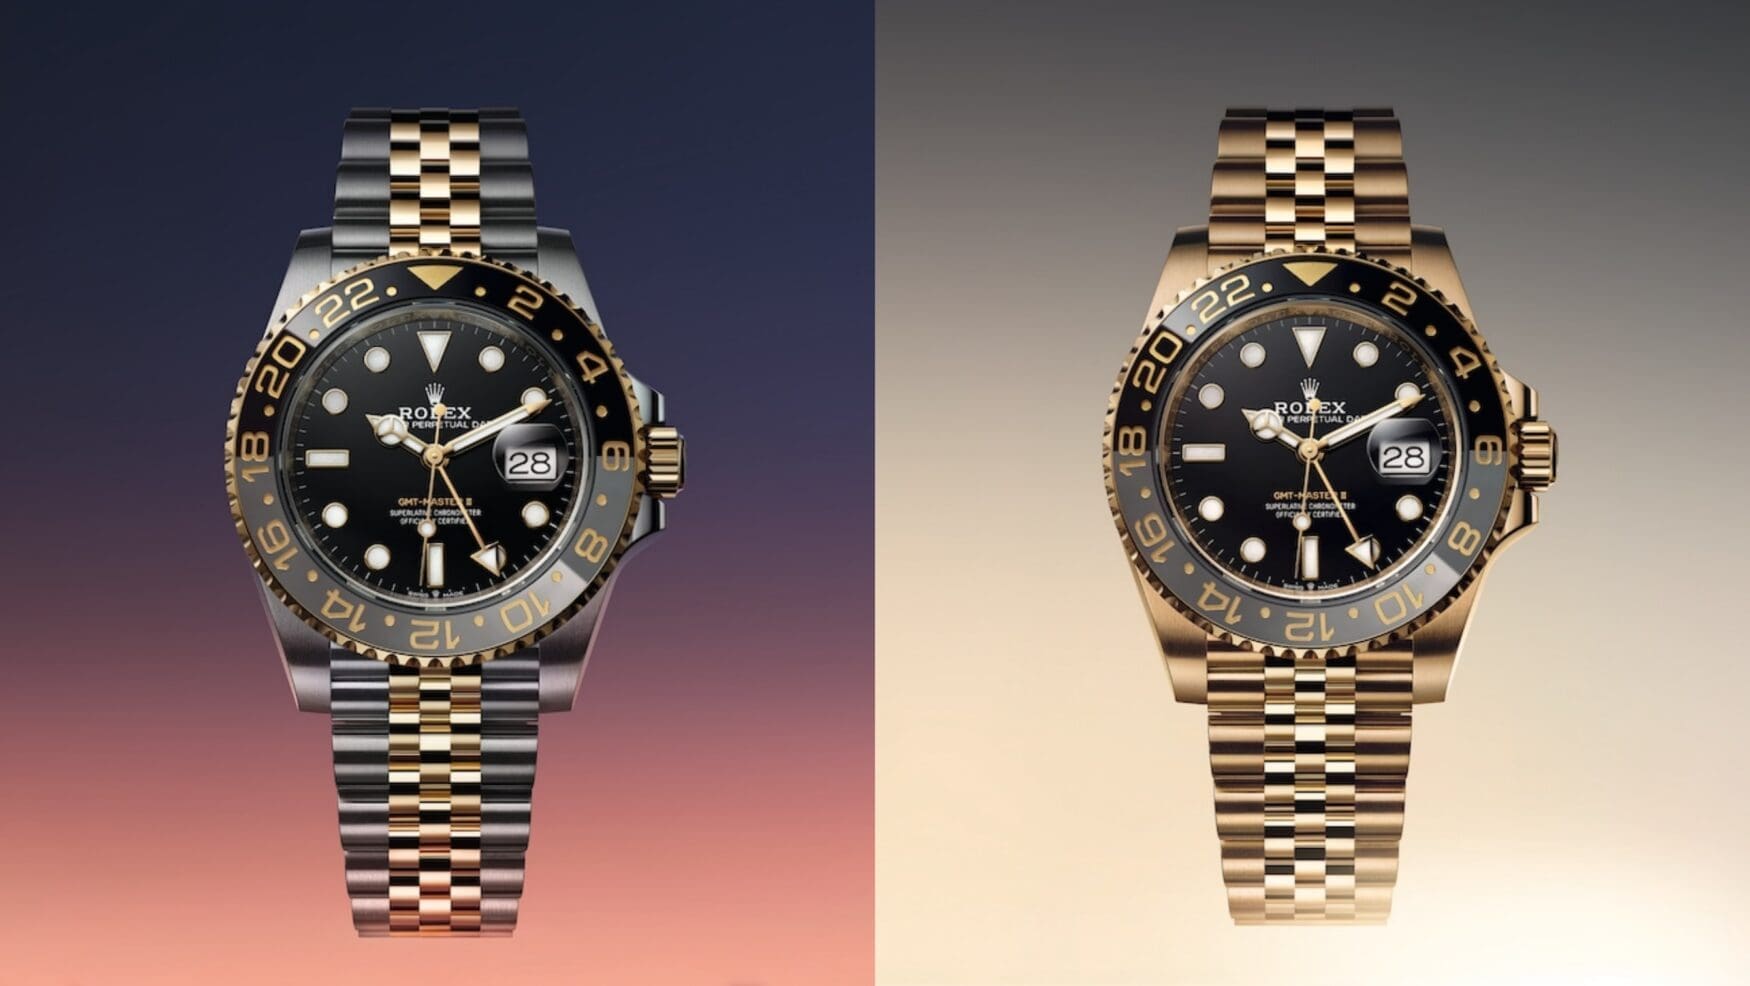 Gold rush: Rolex reintroduces the GMT-Master II in solid yellow gold and two-tone